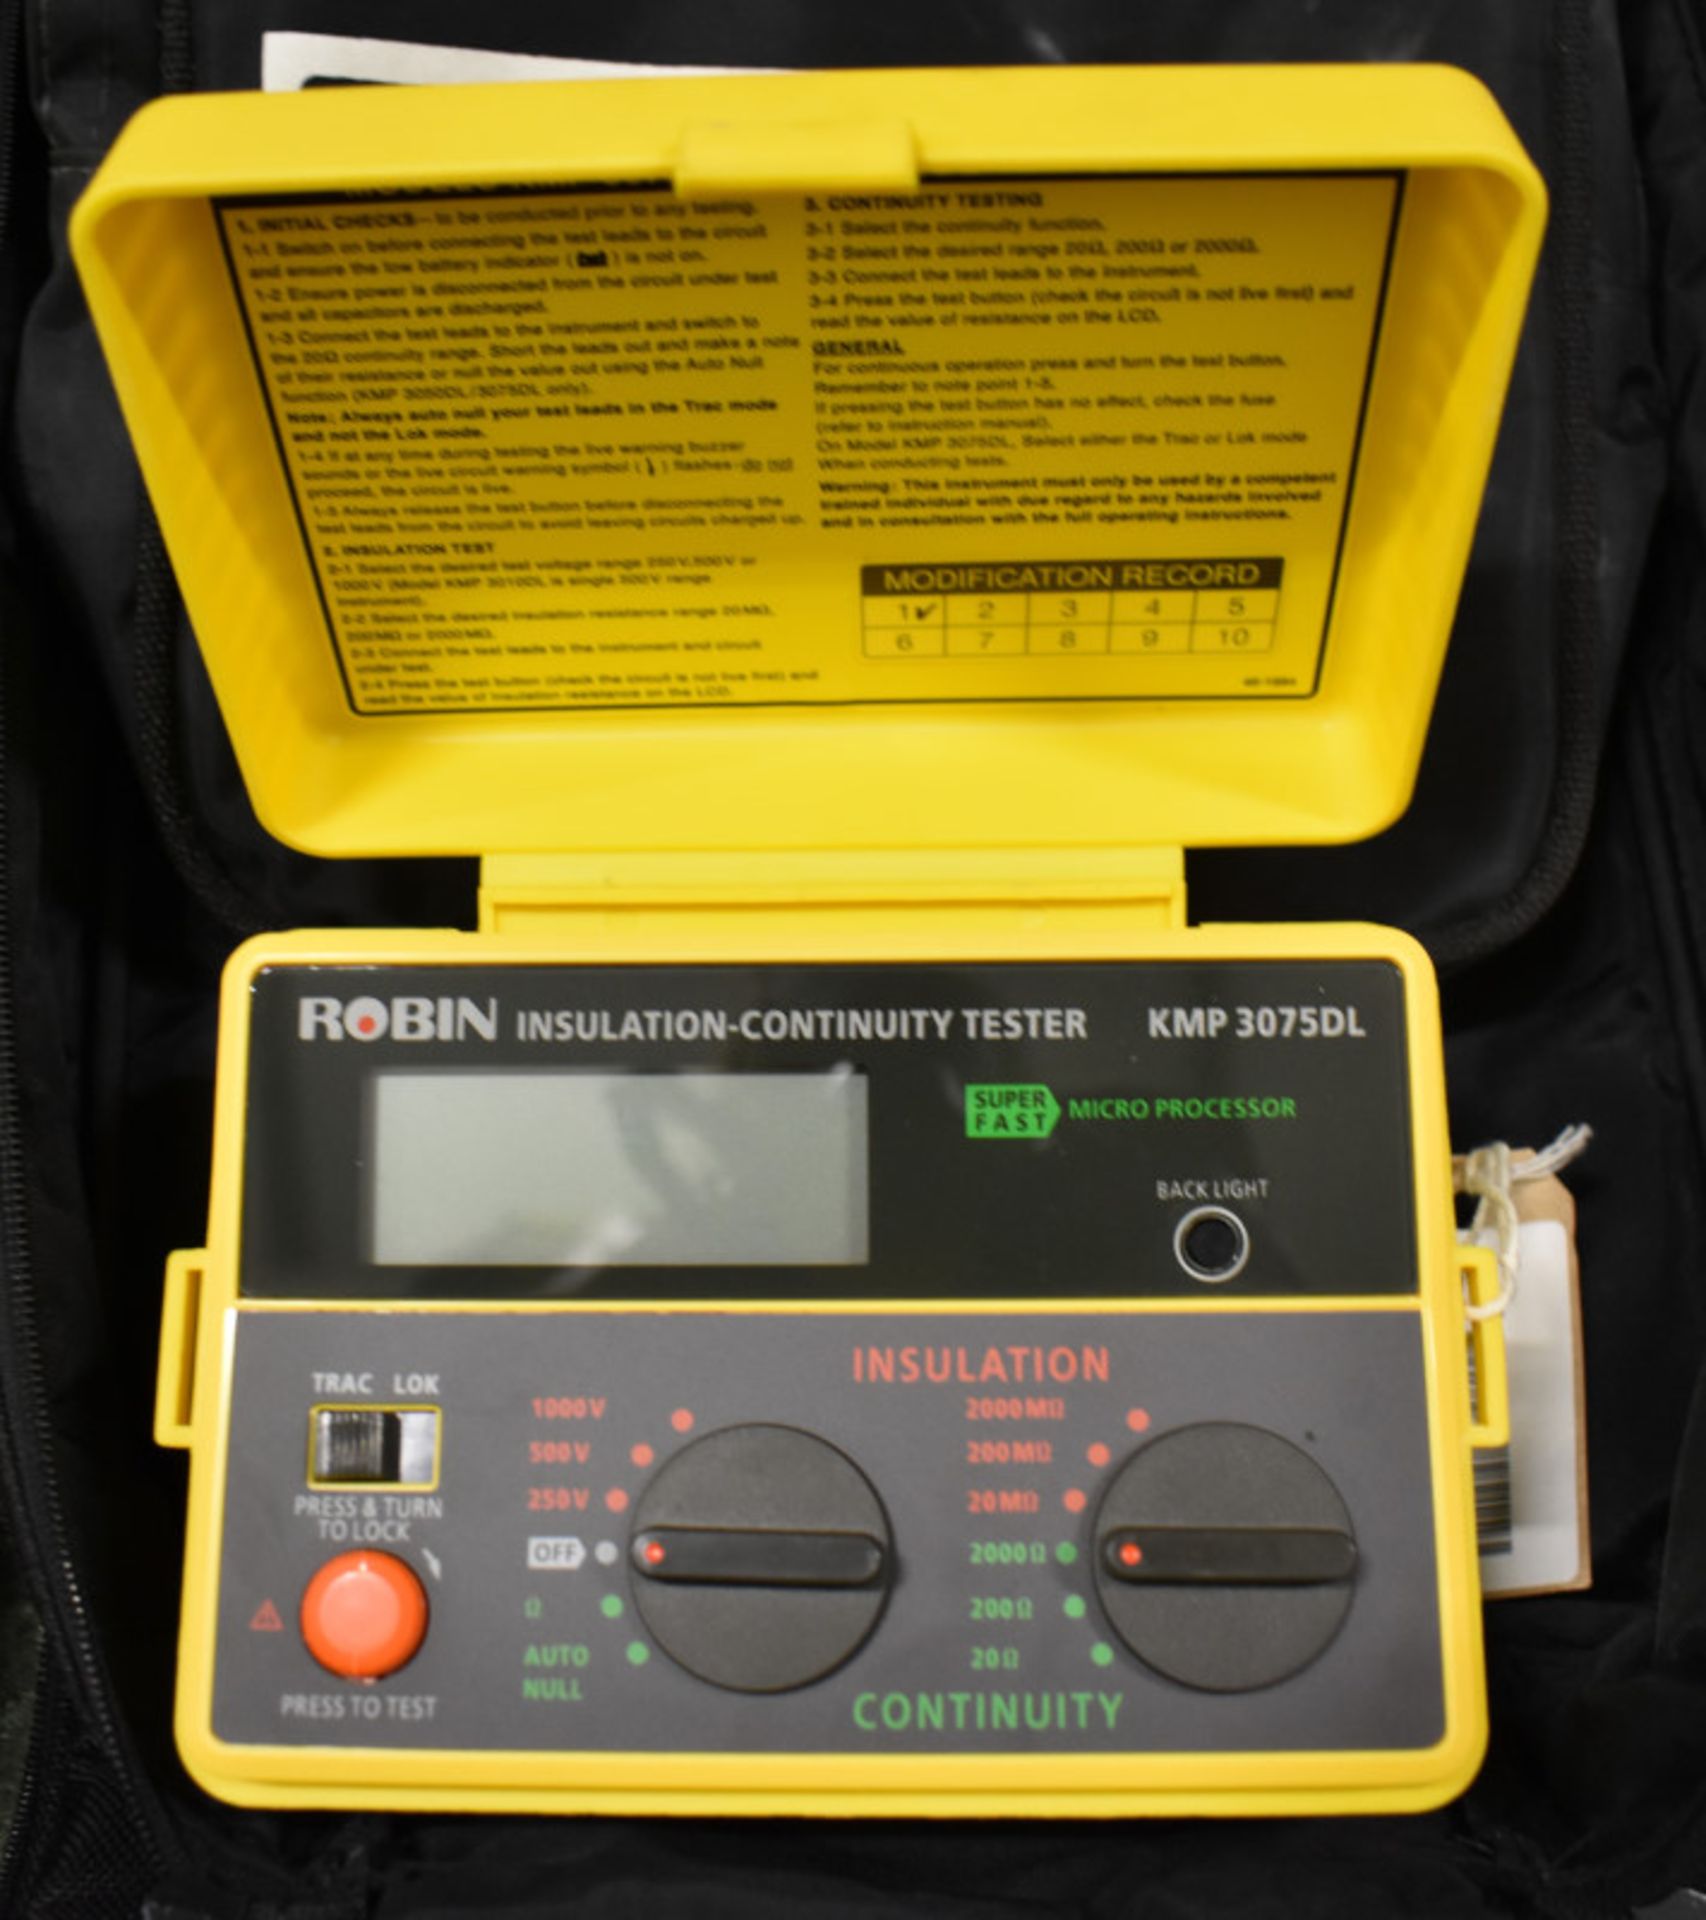 2x Robin Kmp 3075 DCL Continuity And Insulation GP testers - Image 2 of 2